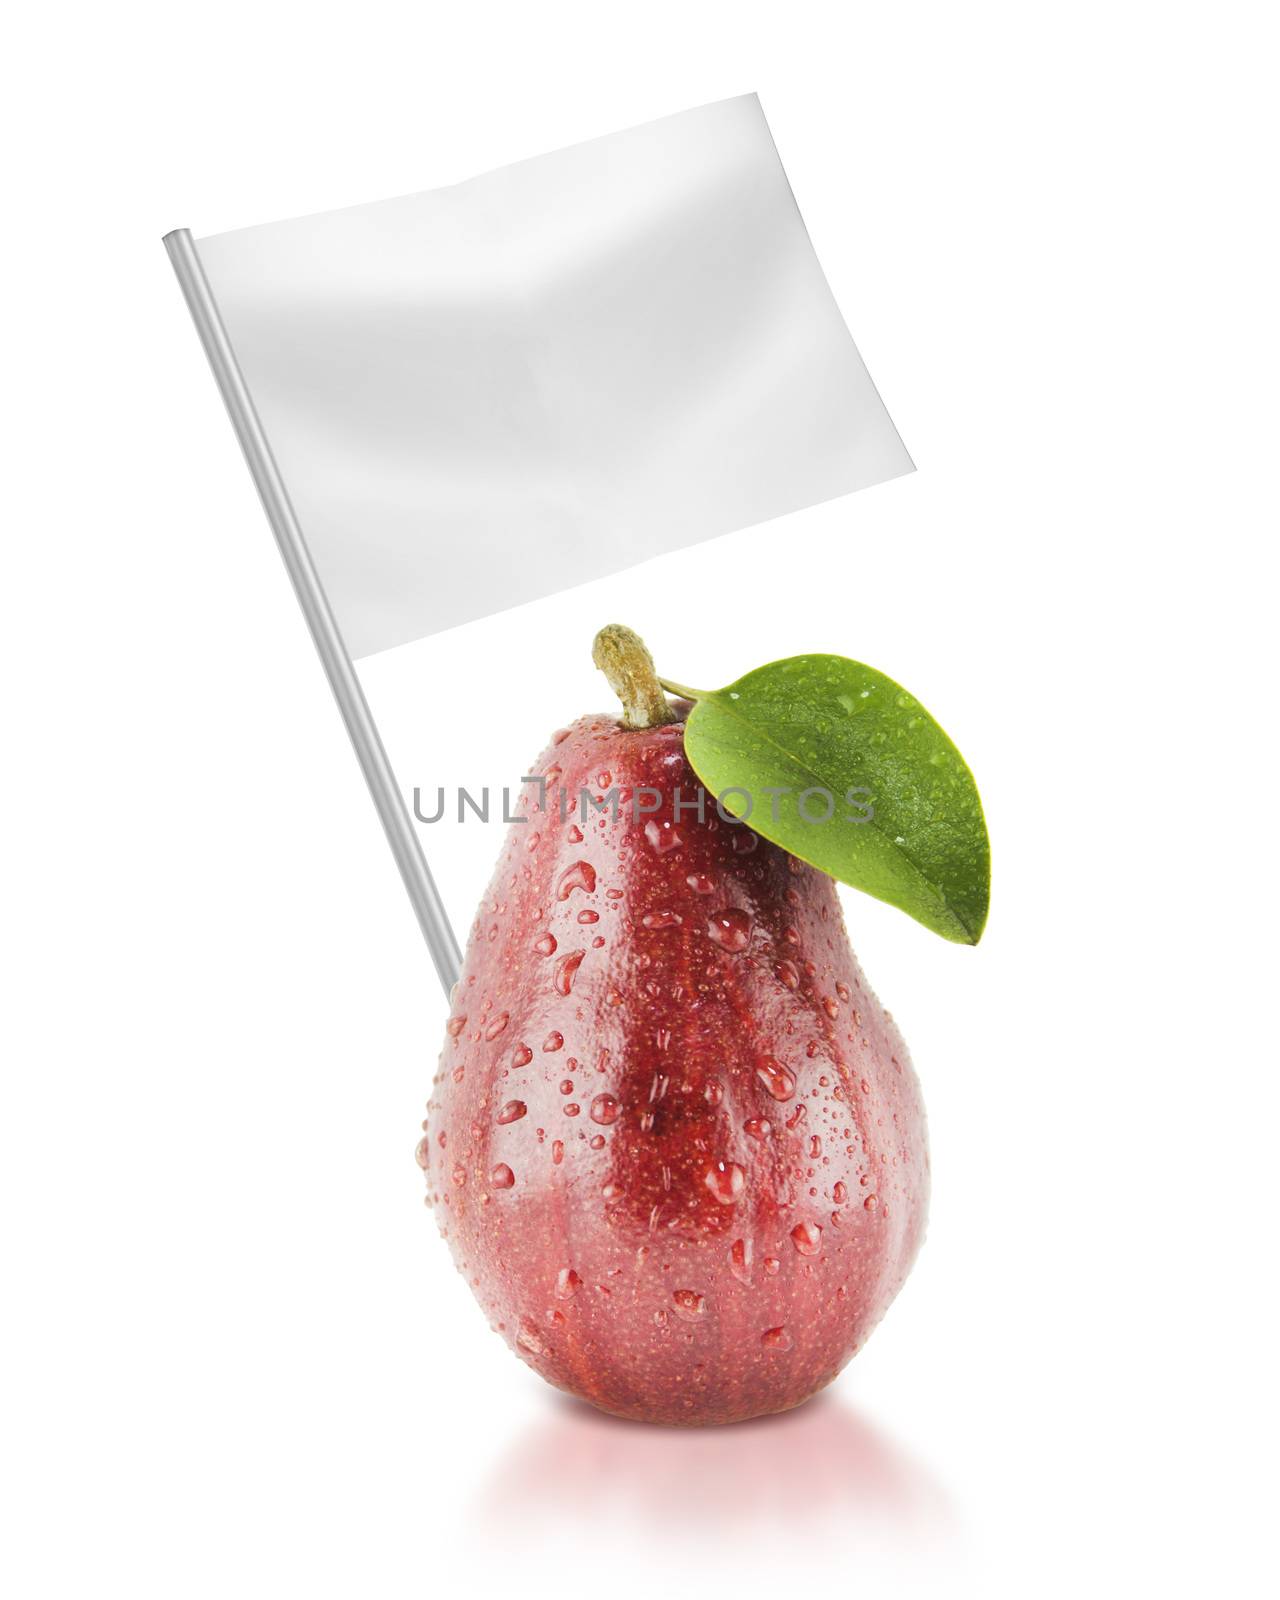 Healthy and organic food concept. Fresh red Pear with flag showing the benefits or the price of fruits.